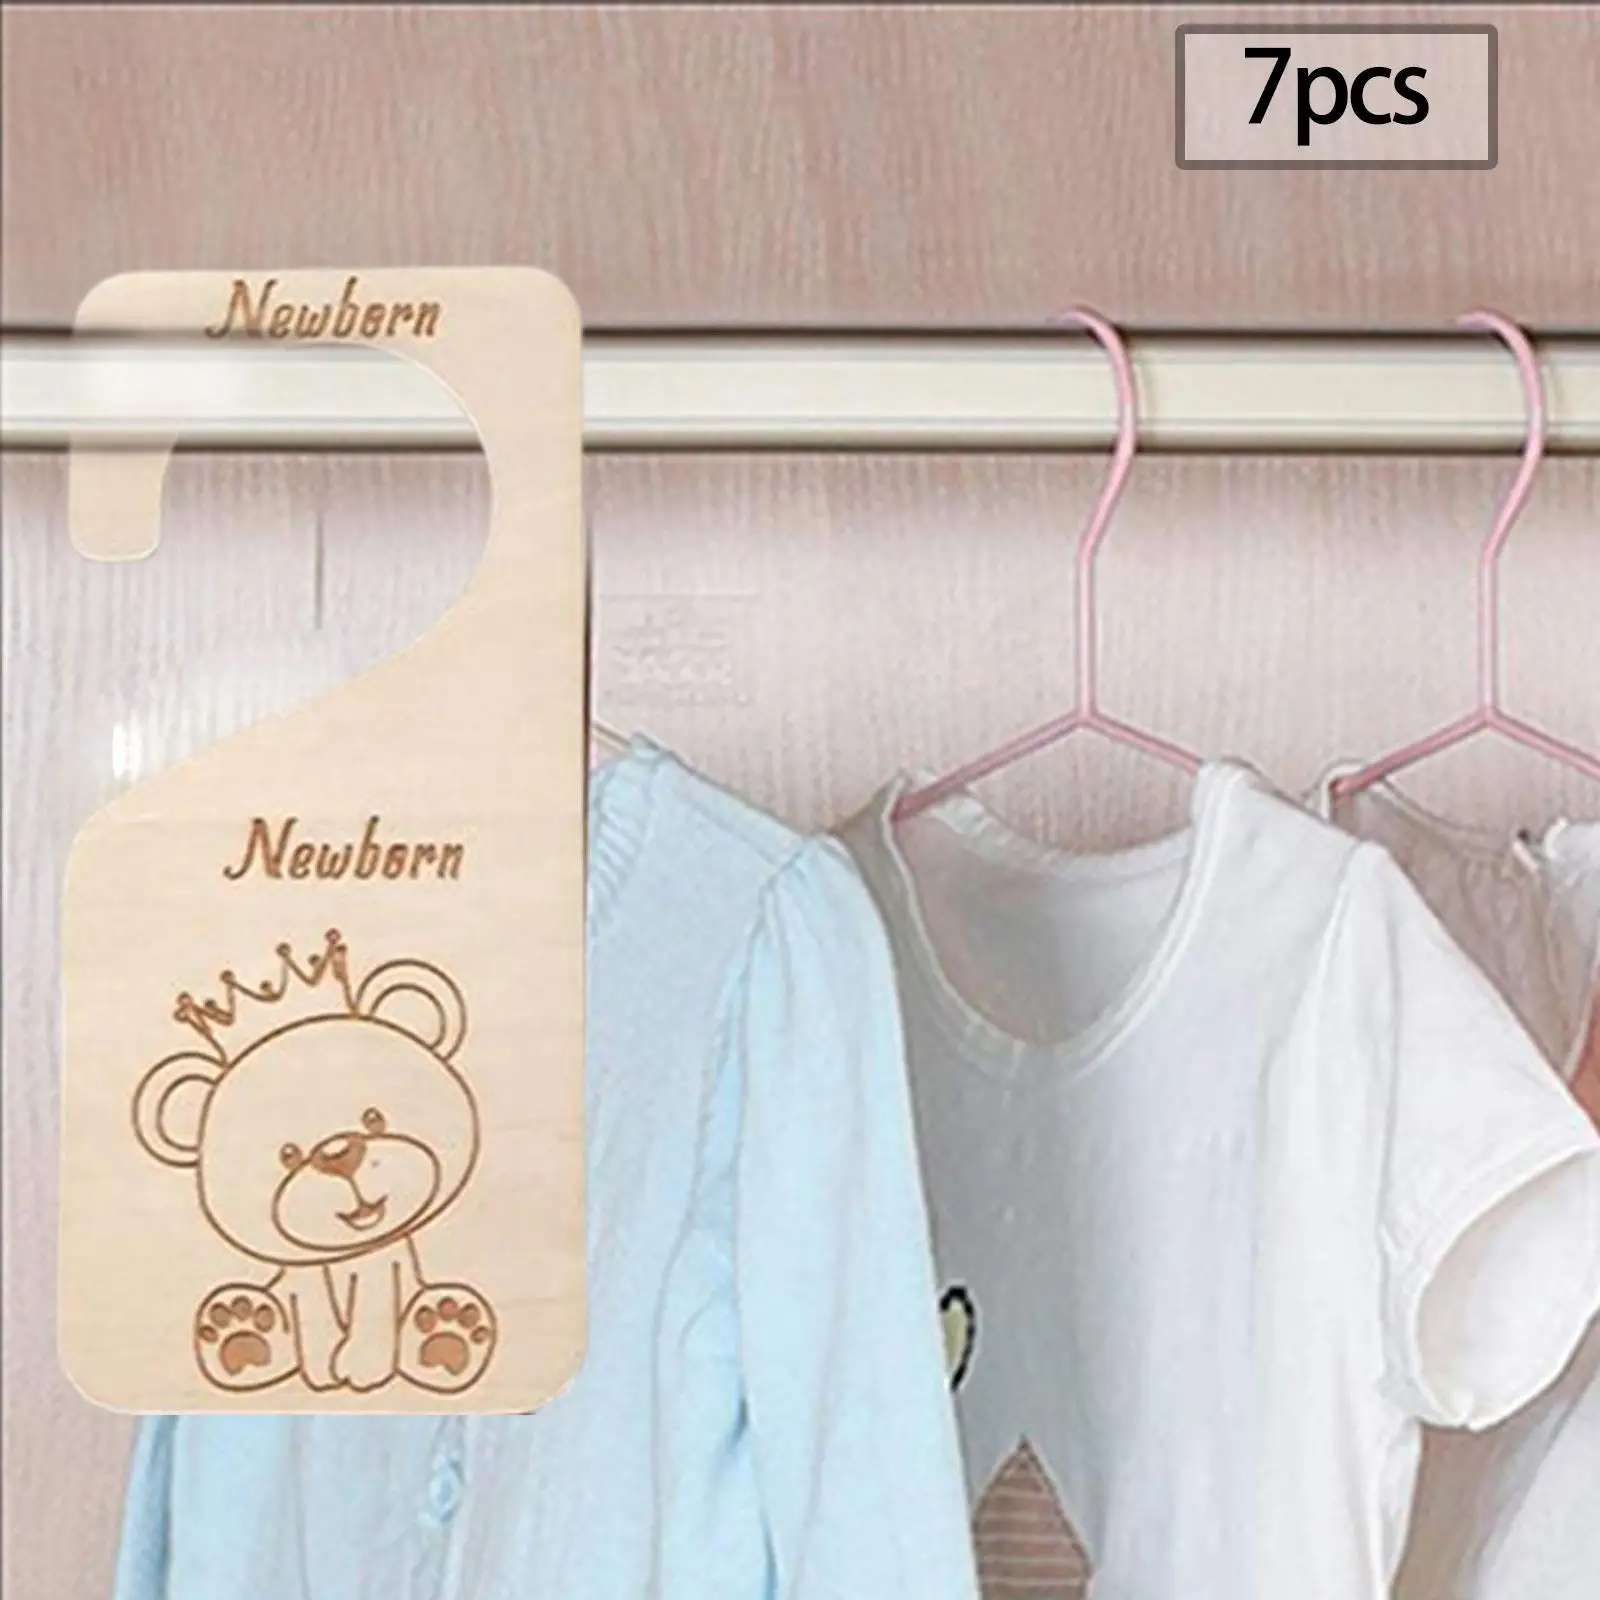 7x Adorable Wooden Closet Divider Organizer Infant Wardrobe Divider Label Newborn Closet Dividers for Bedroom Daily Use Wardrobe